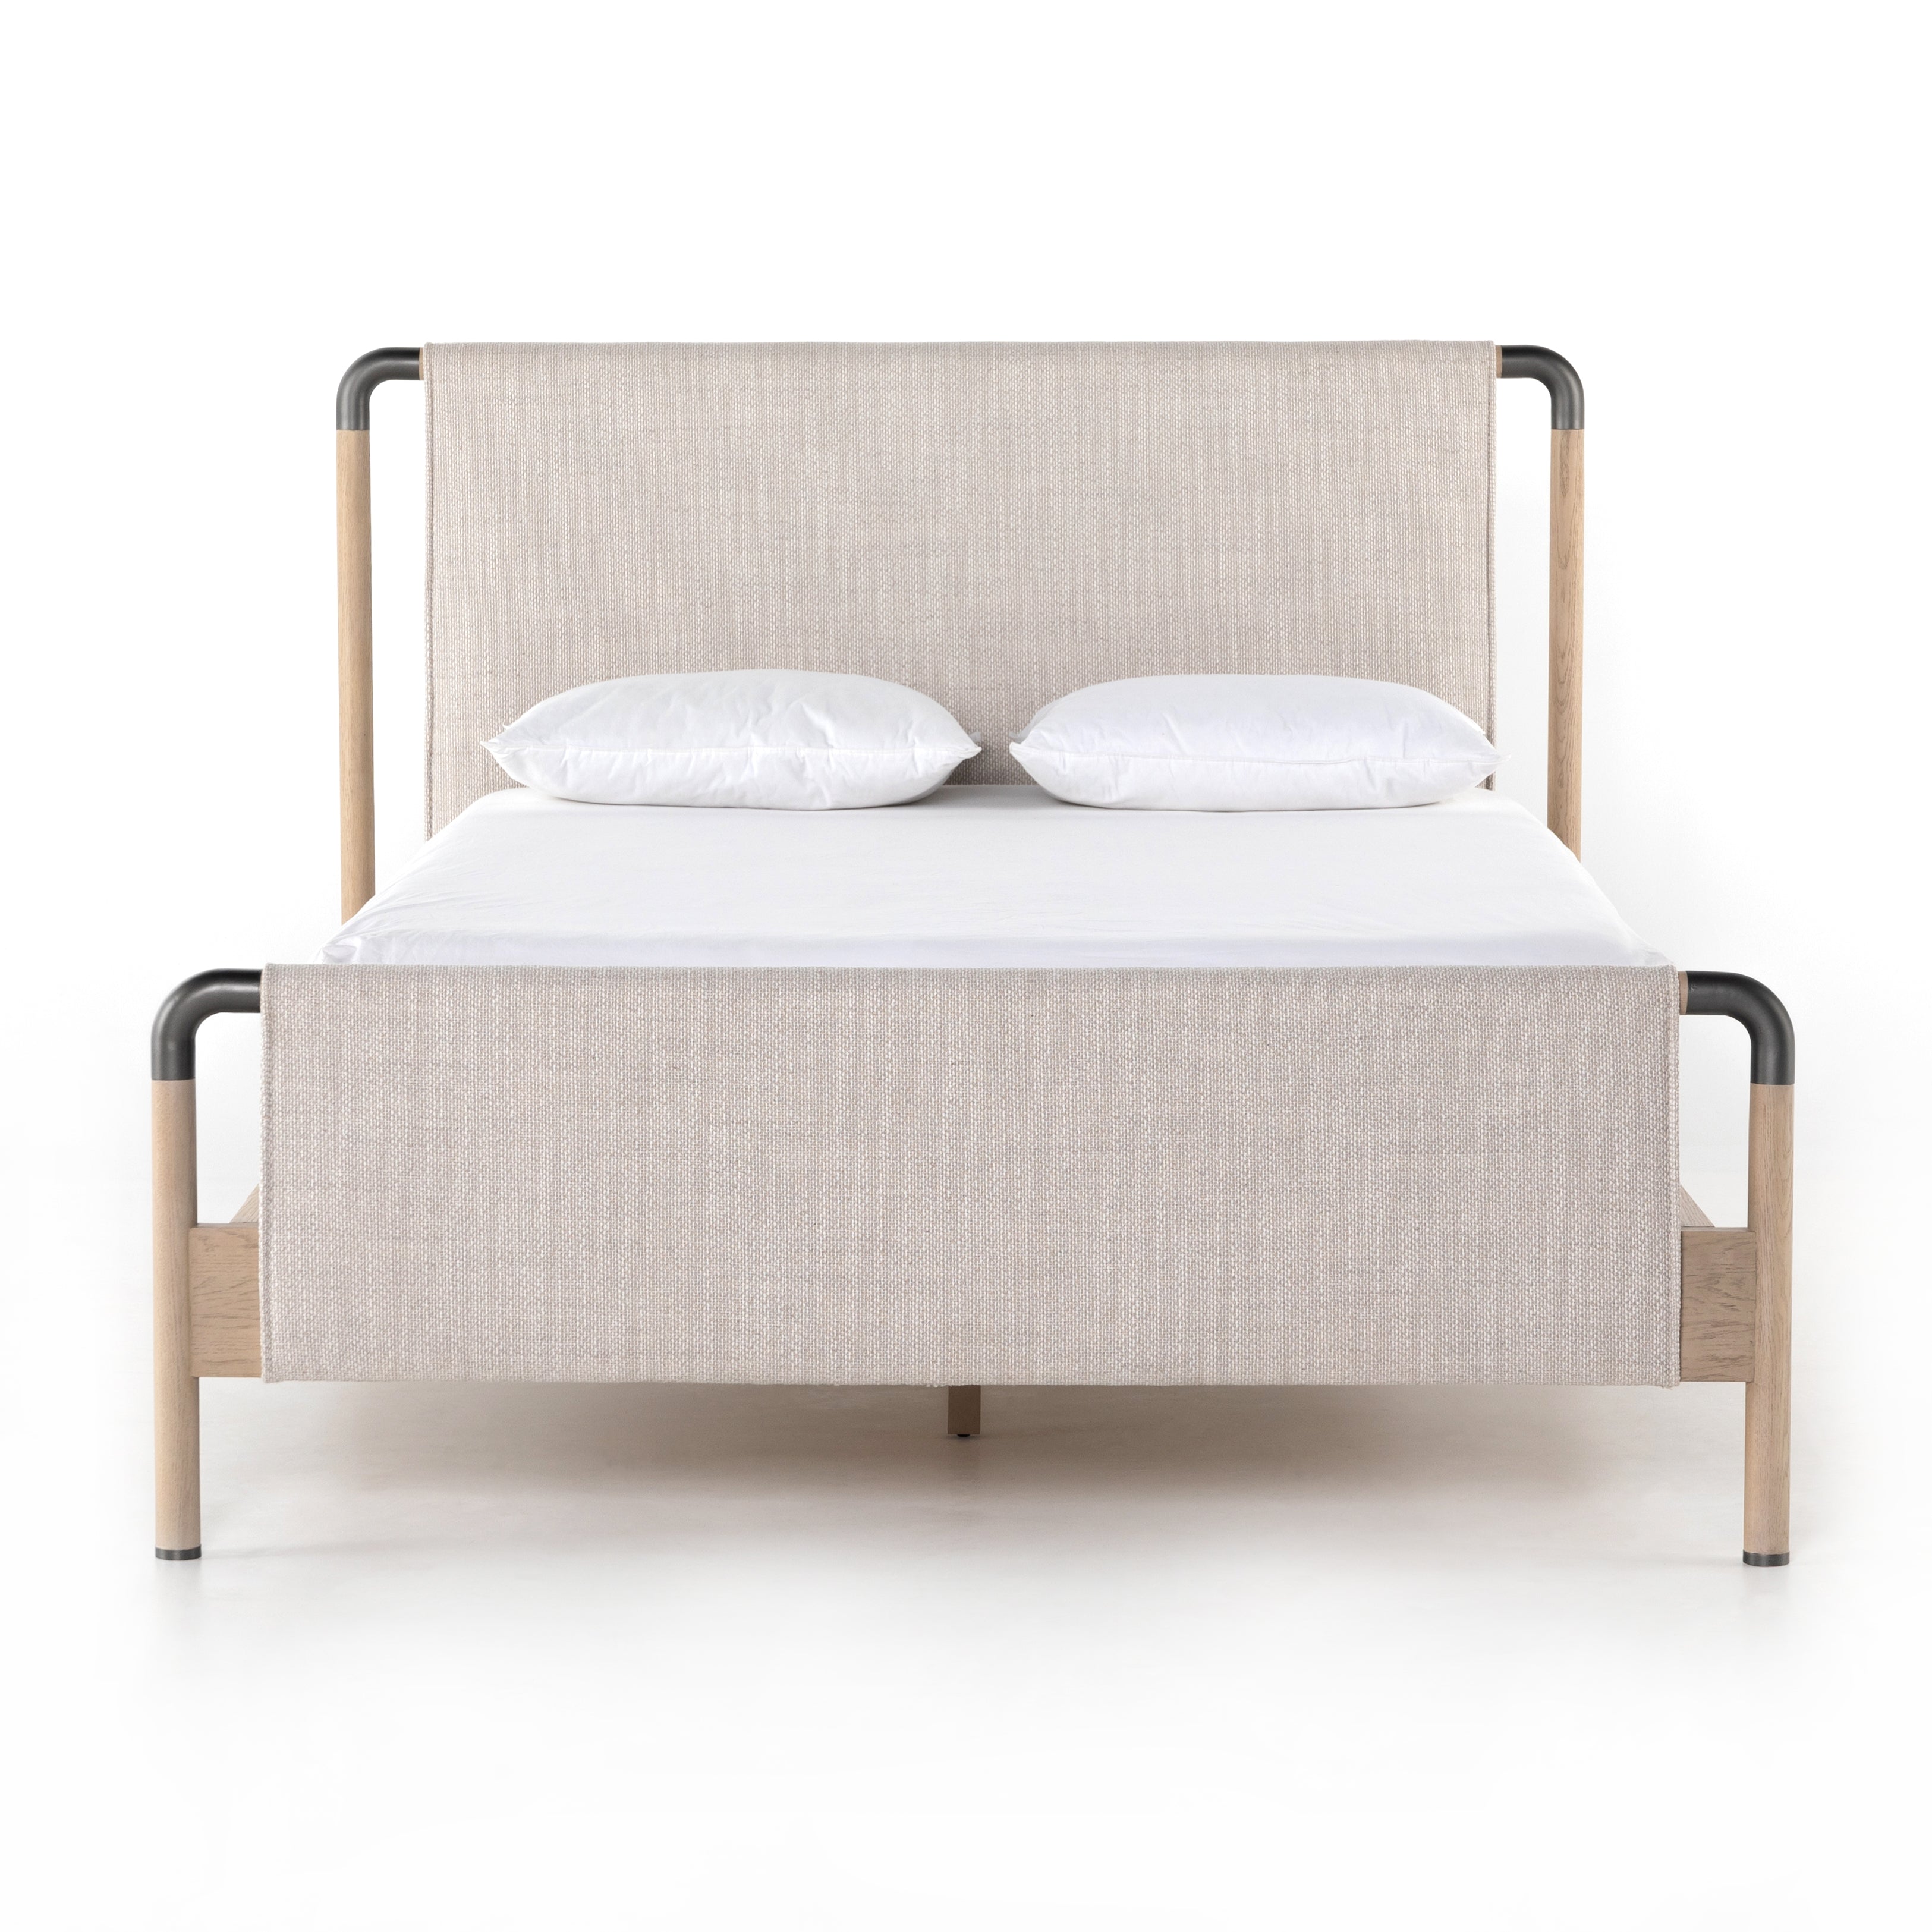 We love the mixed materials of this Harriet Bed. Framed by solid oak with rounded iron corners, an upholstered, sling-style headboard brings a light, modern vibe to any bedroom. Queen Overall Dimensions: 70.50"w x 88.50"d x 51.00"h  King Overall Dimensions: 86.50"w x 88.50"d x 51.00"h